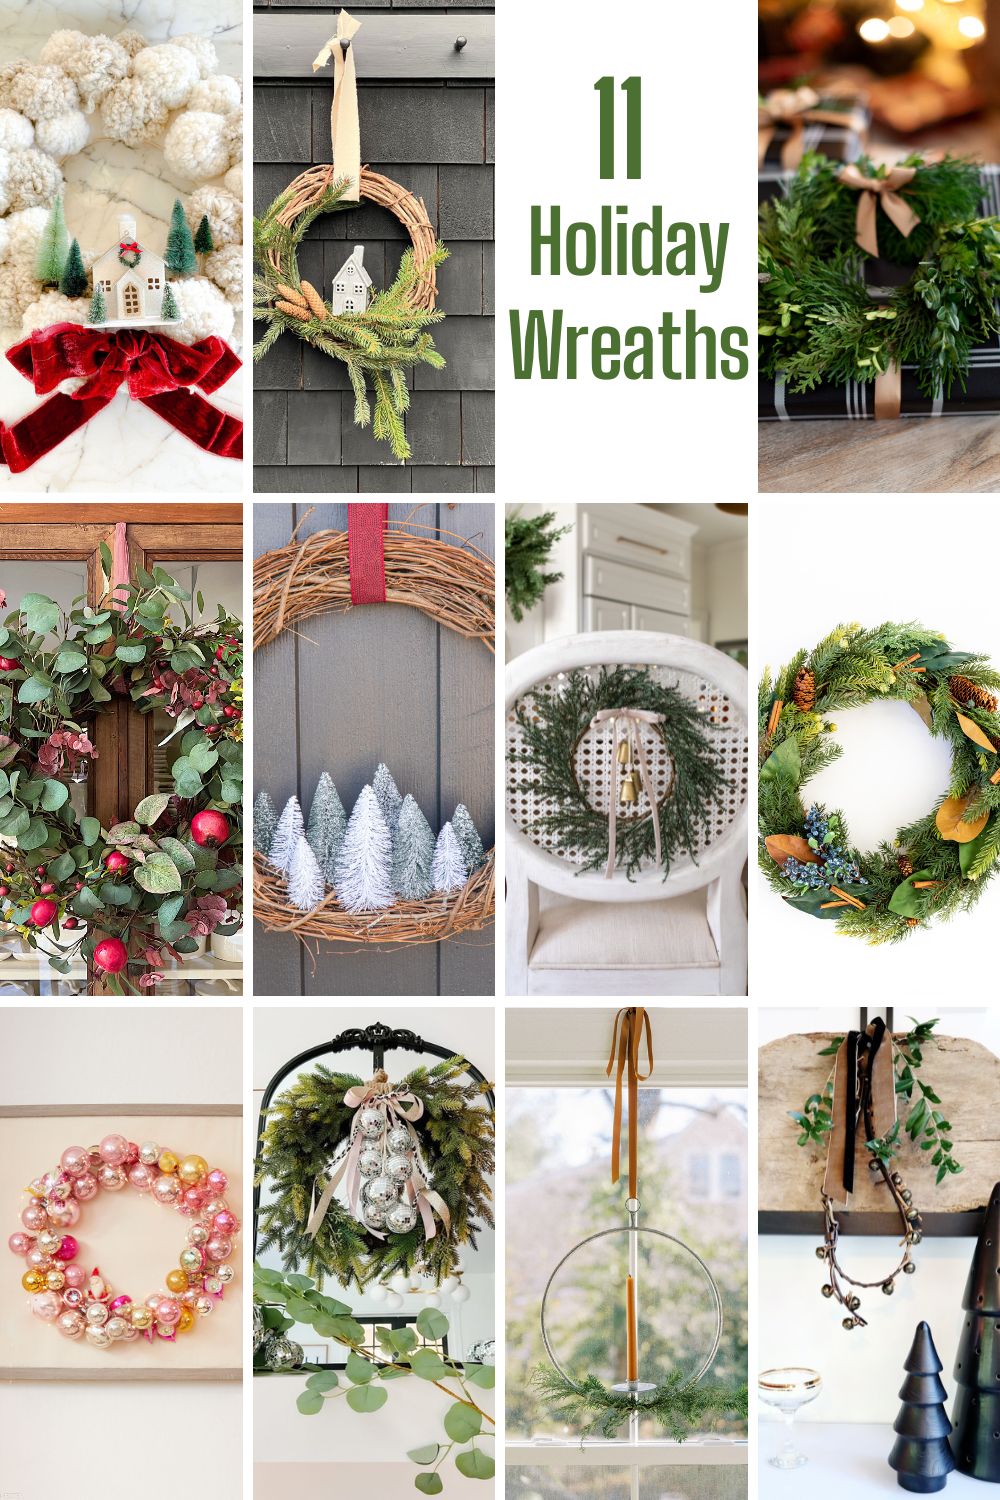 My Christmas decor theme last year was pomegranates. Are you ready to see how to make this easy eucalyptus wreath with pomegranates?